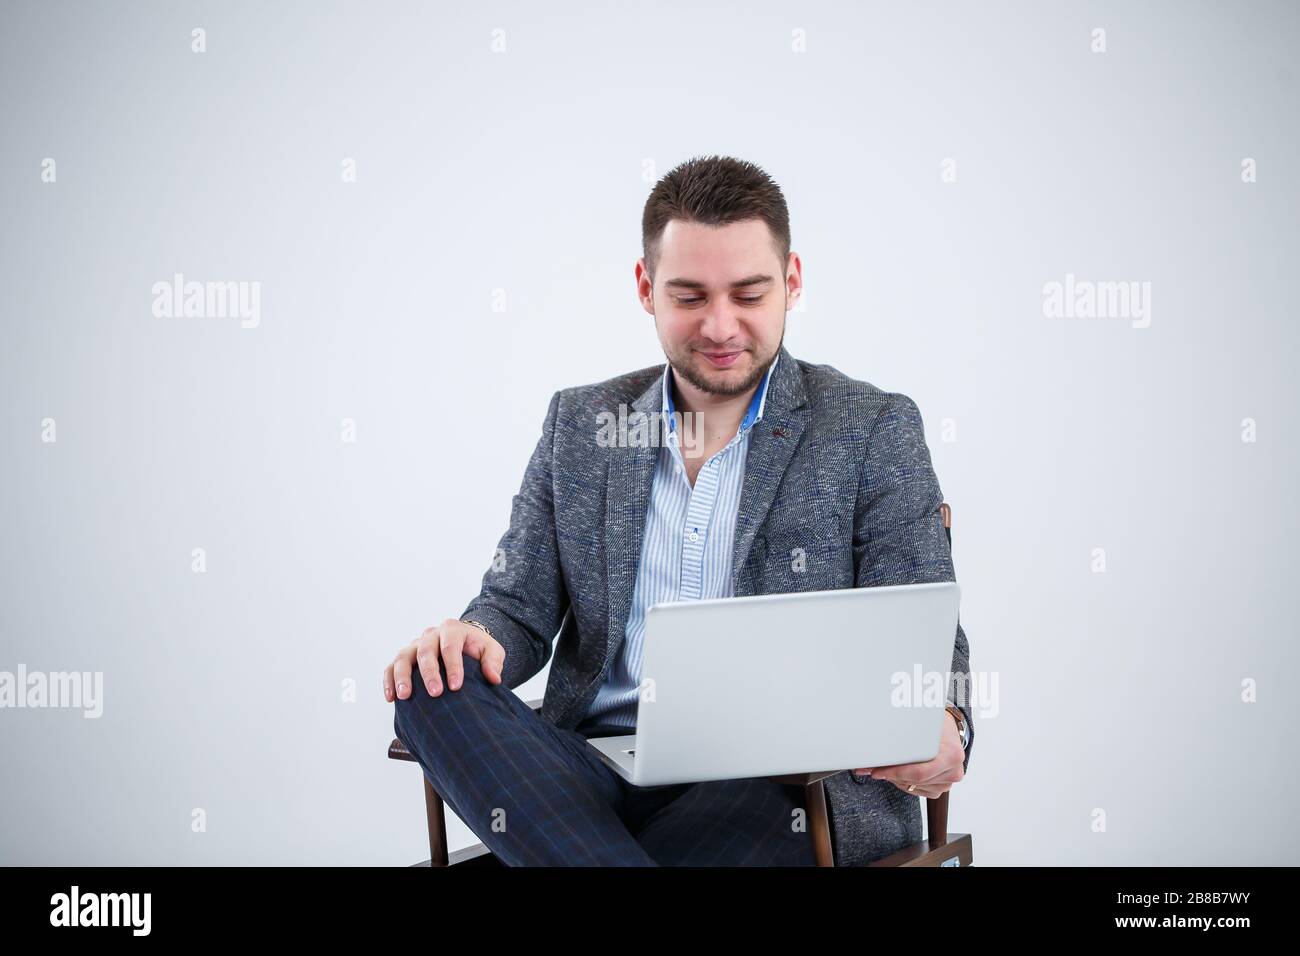 Male teacher director businessman sitting on a chair studying documents. He is looking at the laptop screen. New business project. Stock Photo